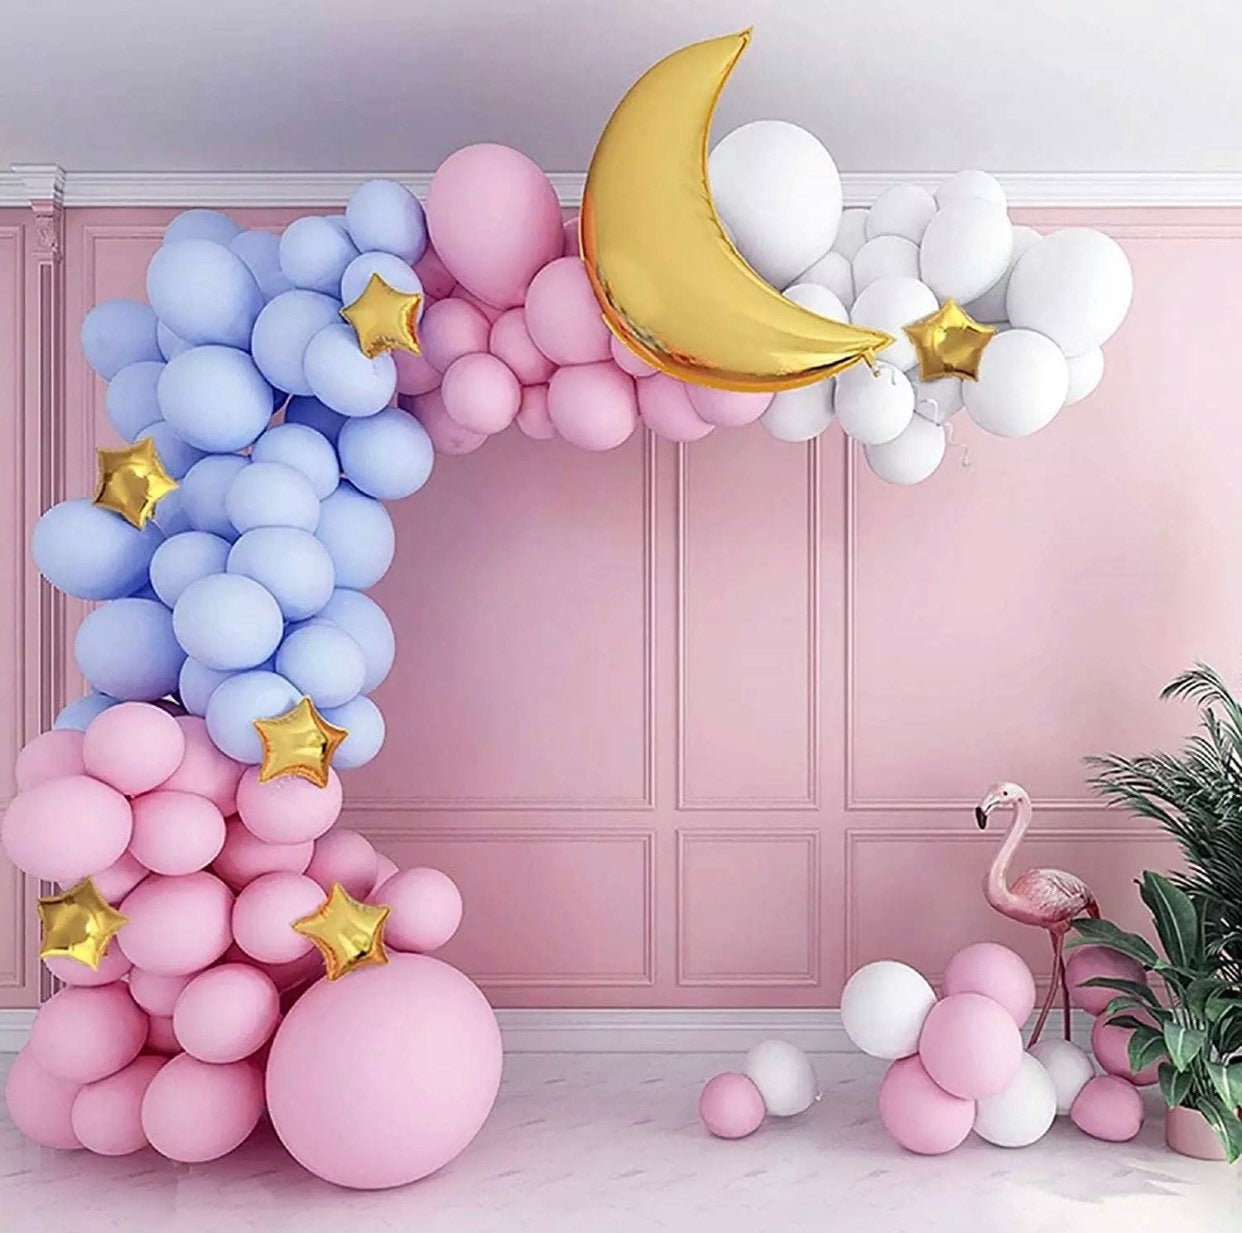 Coffee Pastel Blue PInk Gender Reveal Balloon Garland Kit Baby Shower Oh Baby  Party Decorations Supplies